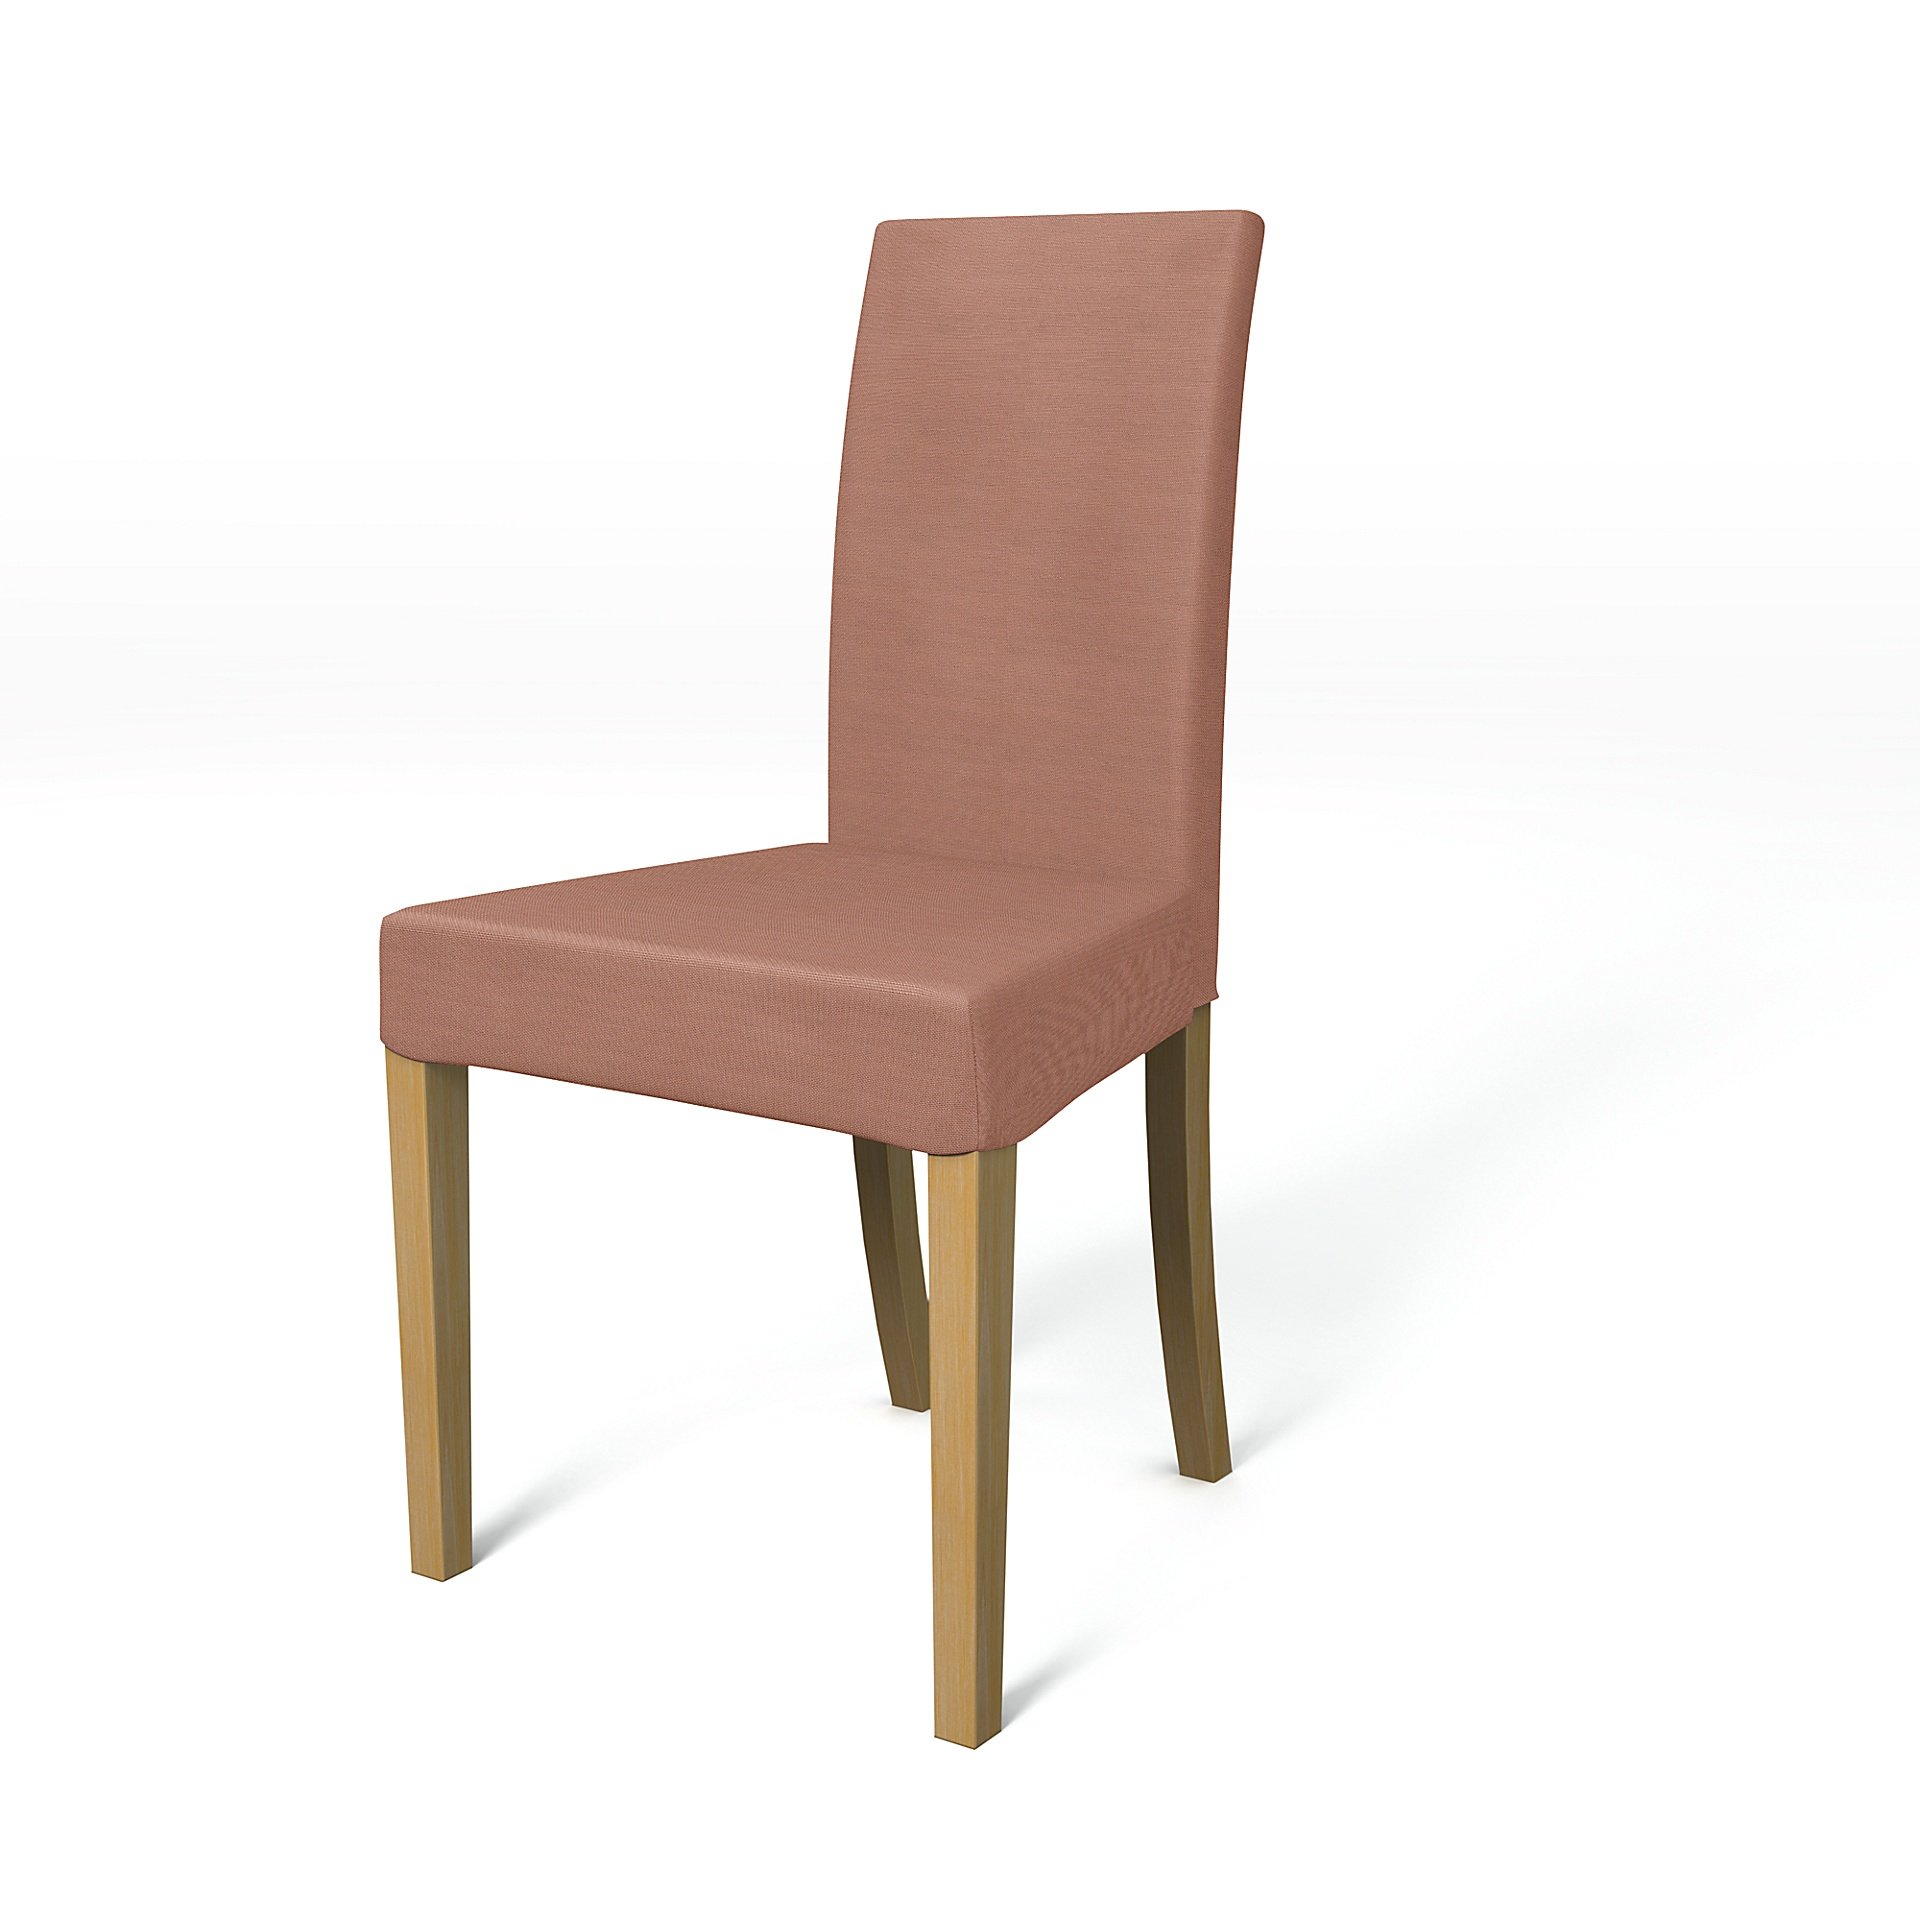 IKEA - Harry Dining Chair Cover, Dusty Pink, Outdoor - Bemz